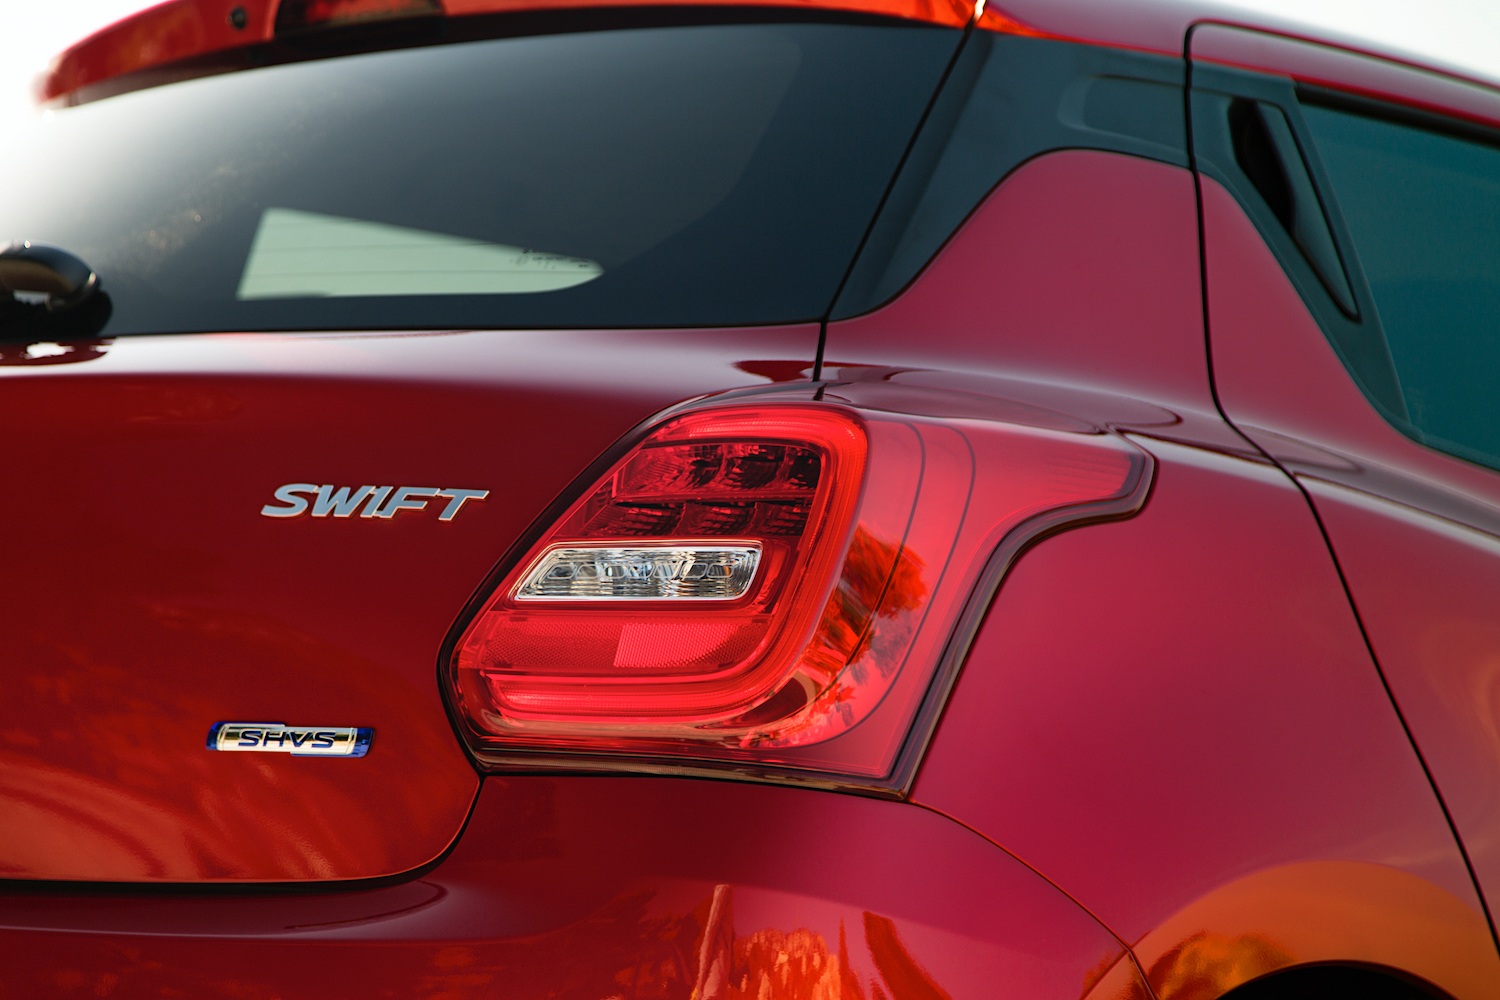 Tom Scanlan reviews the All-New Suzuki Swift for Drive 13